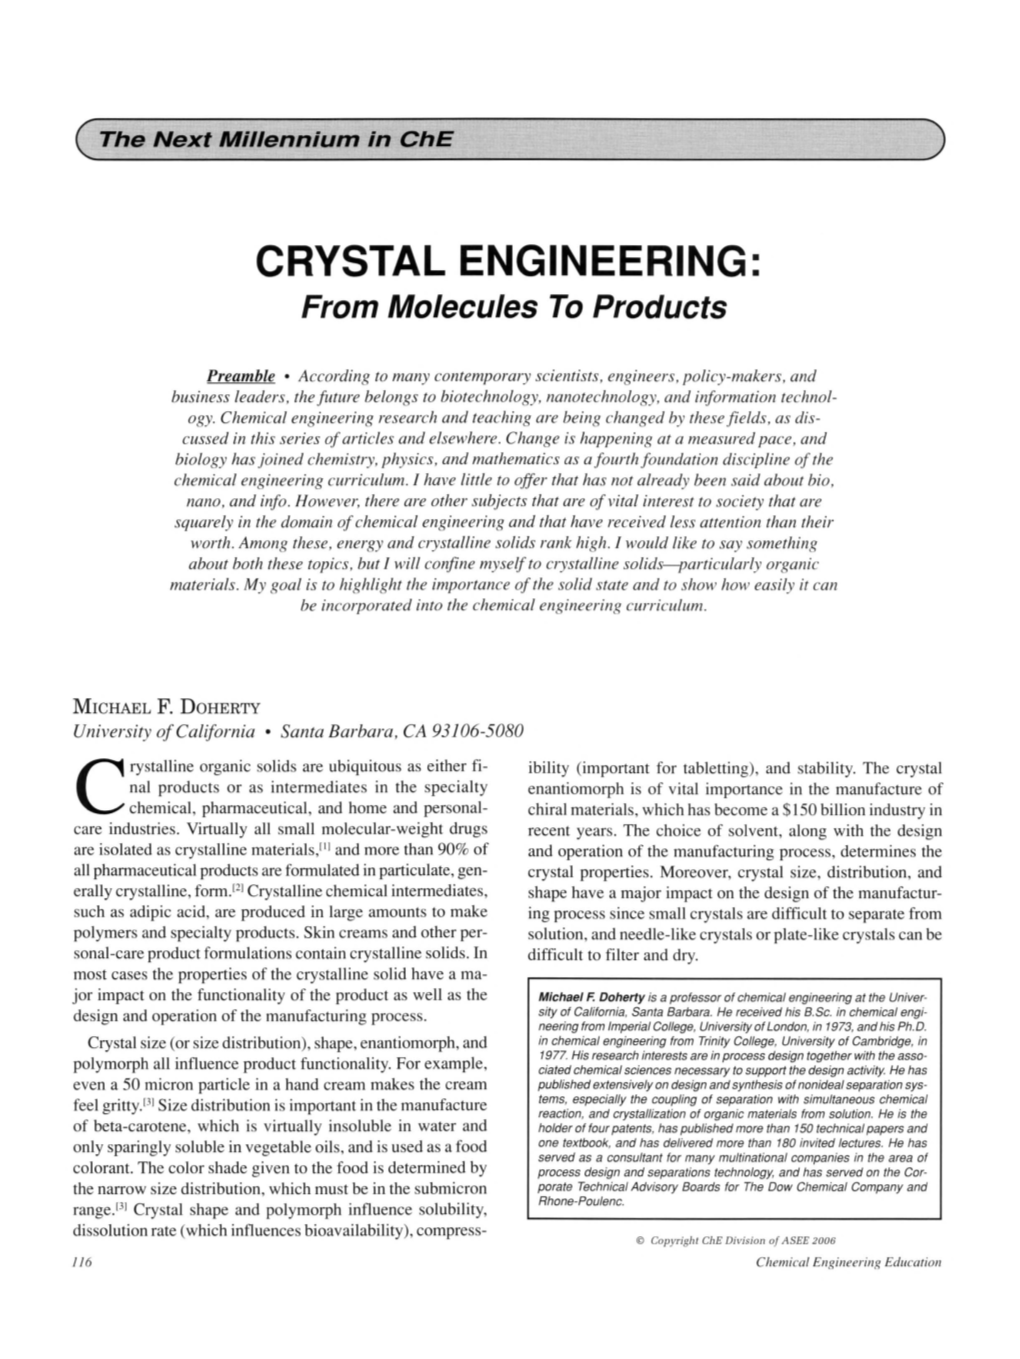 CRYSTAL ENGINEERING: from Molecules to Products